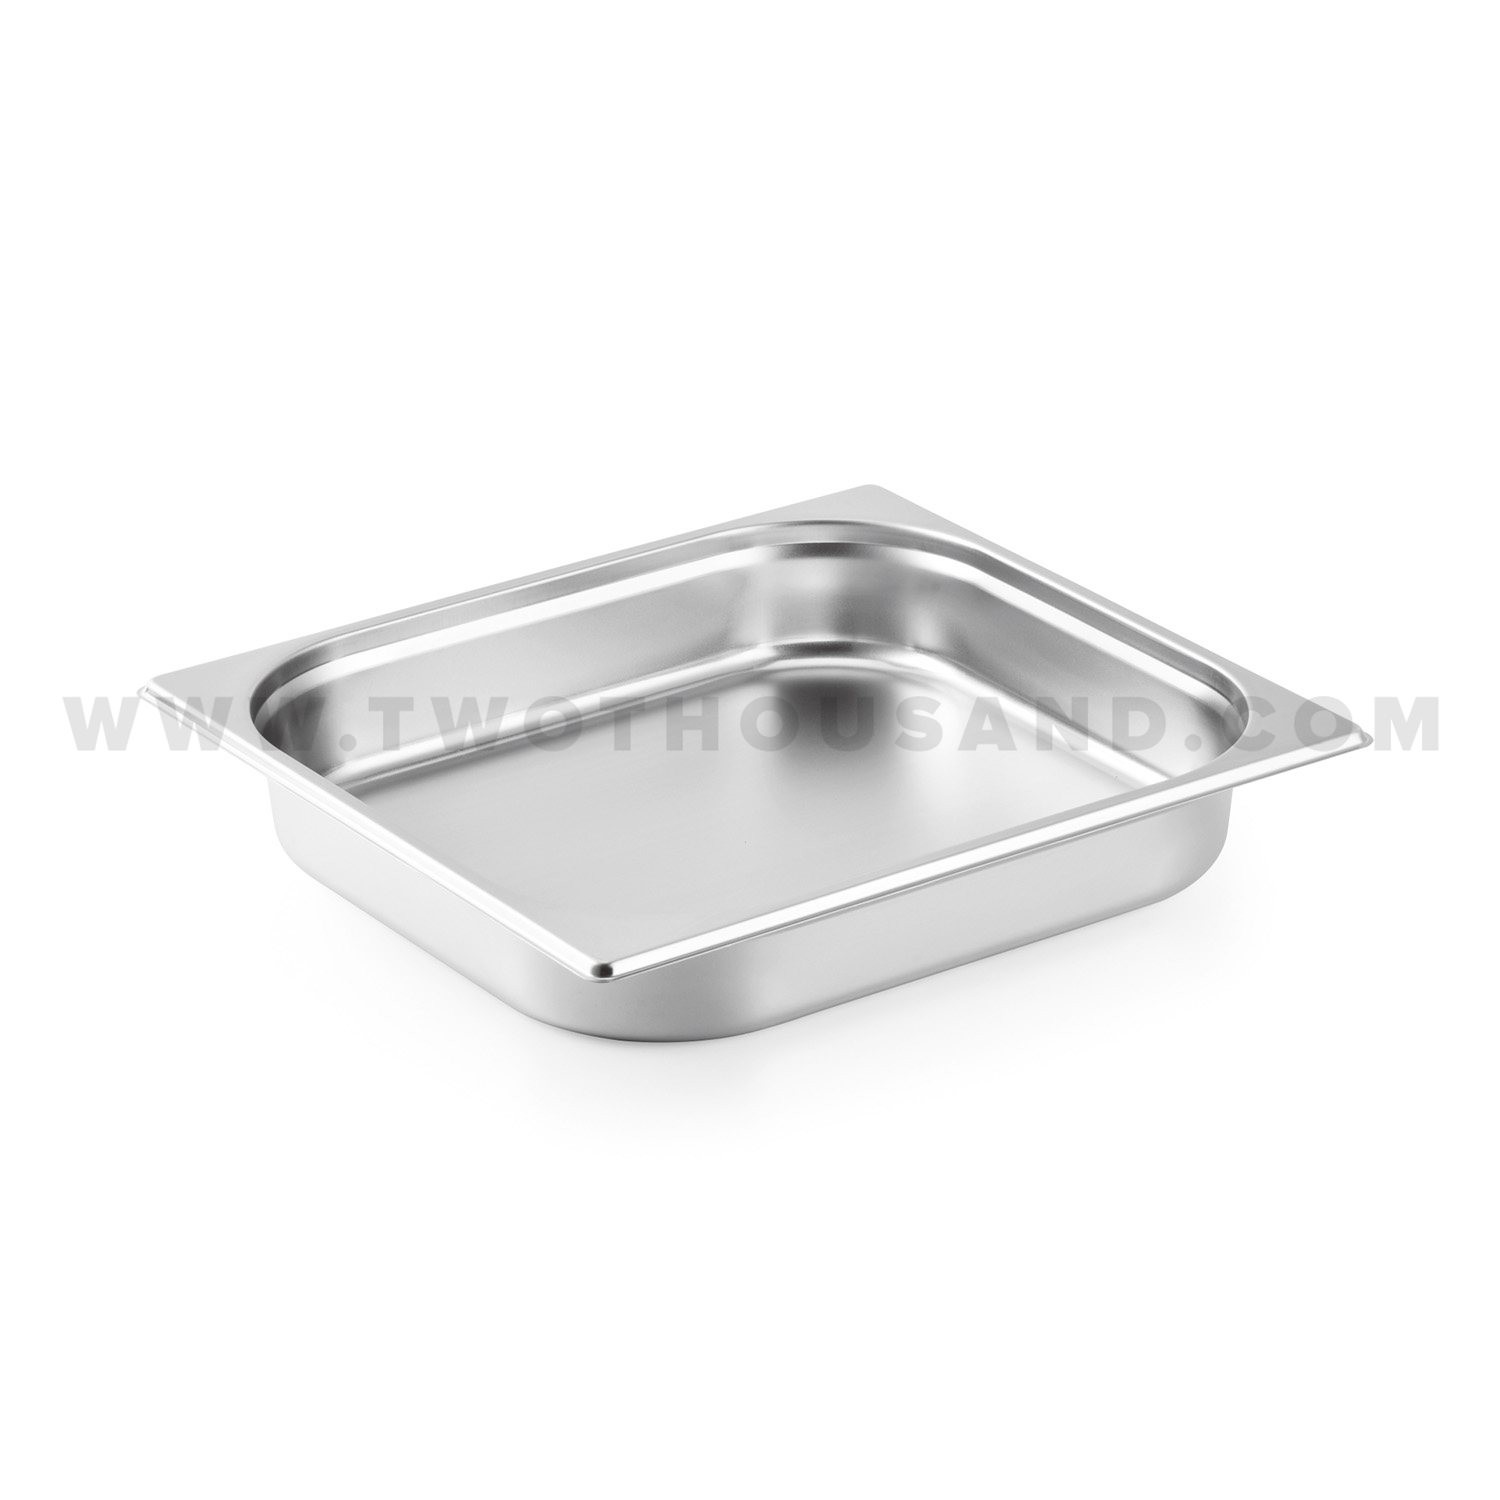 Stainless Steel Steam Table Pan TT-823-2 - Main View